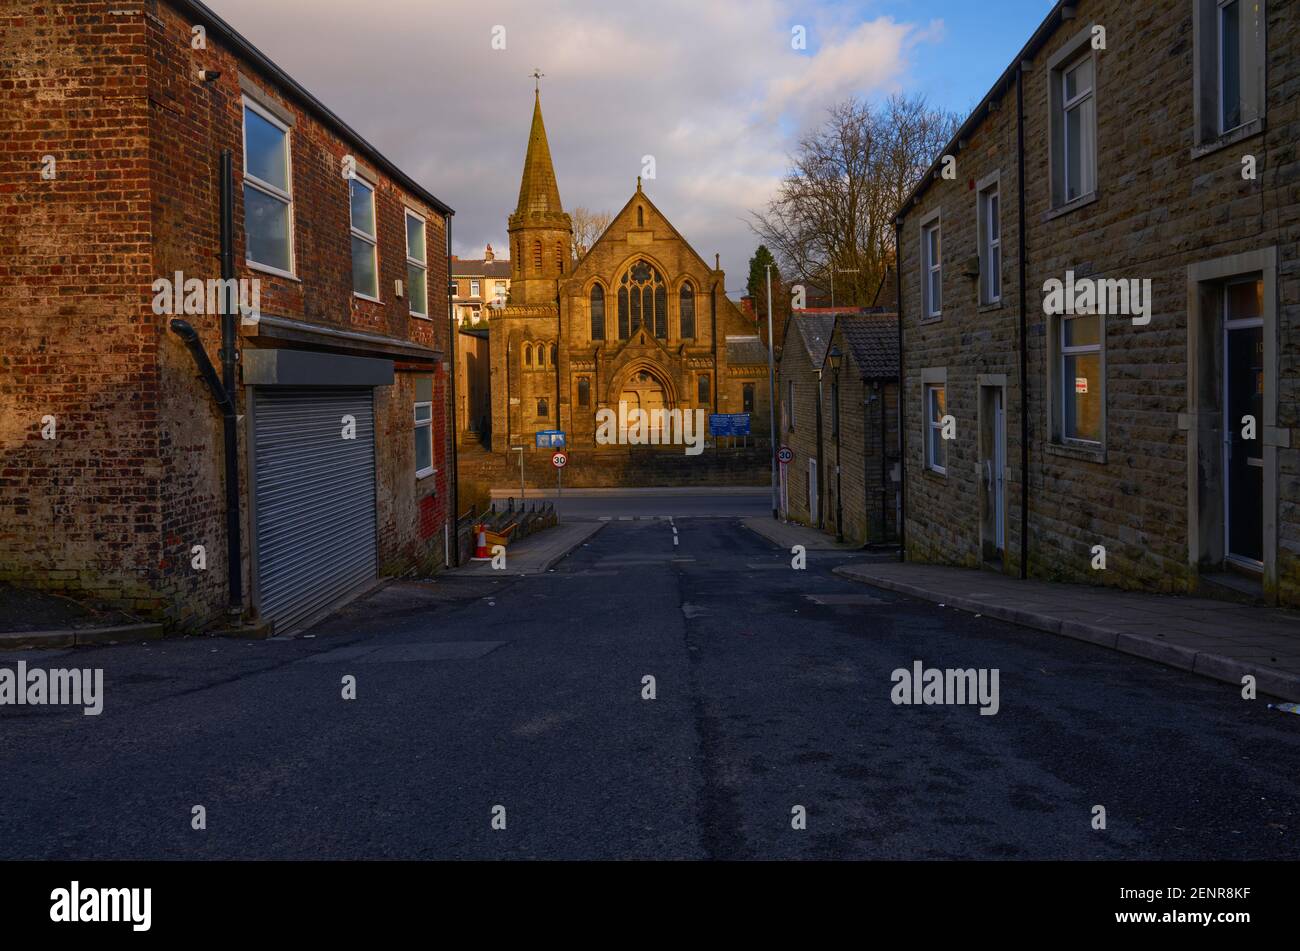 As the sun gets low over a northern town, the stone built church at the end of the street is illuminated in a beautiful yellow light Stock Photo